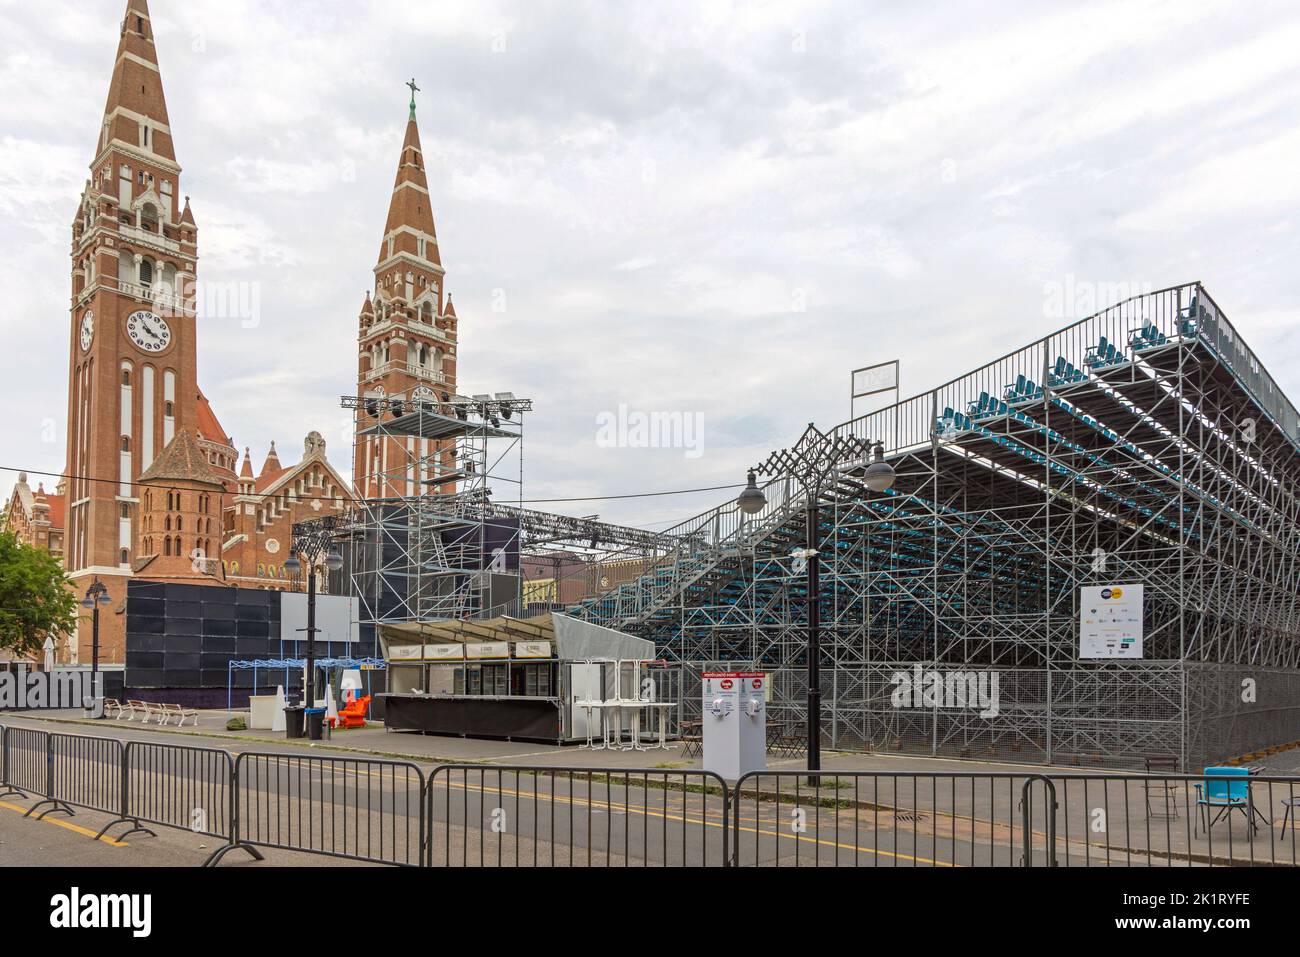 Szeged, Hungary - July 30, 2022: Temporary Stage and Stands Concert Venue in Front of Votive Church Cathedral During Summer. Stock Photo